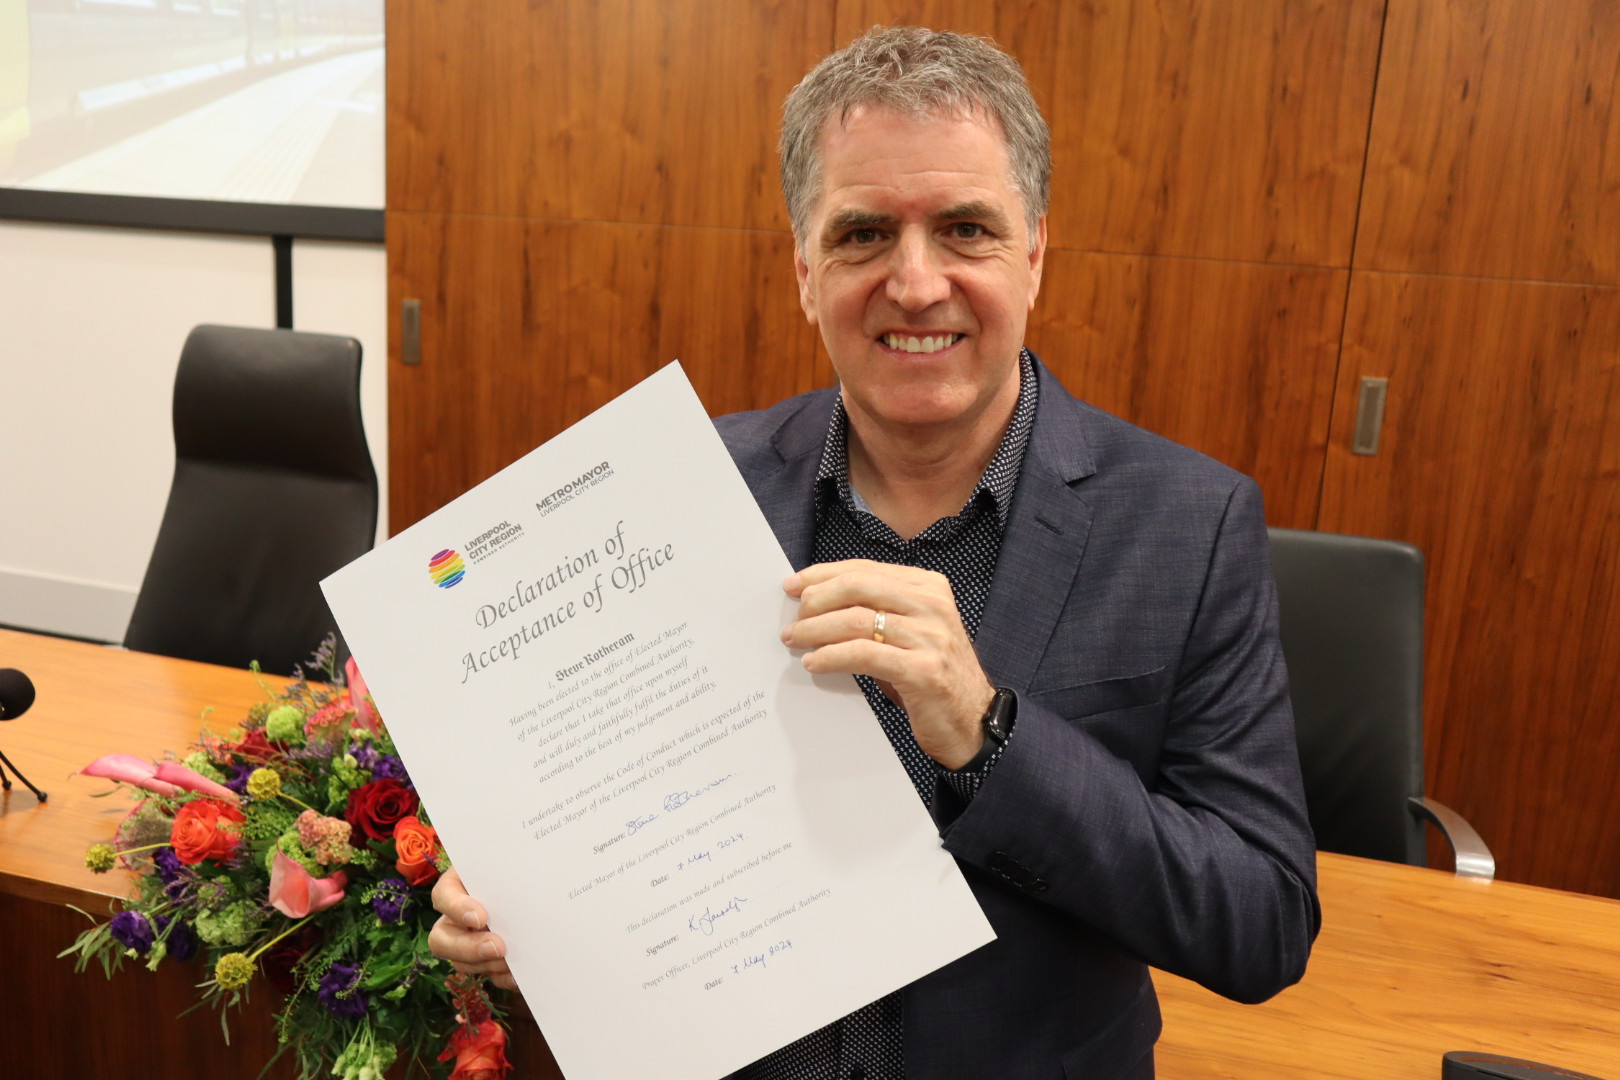 Mayor Rotheram with signed Acceptance of Office certificate